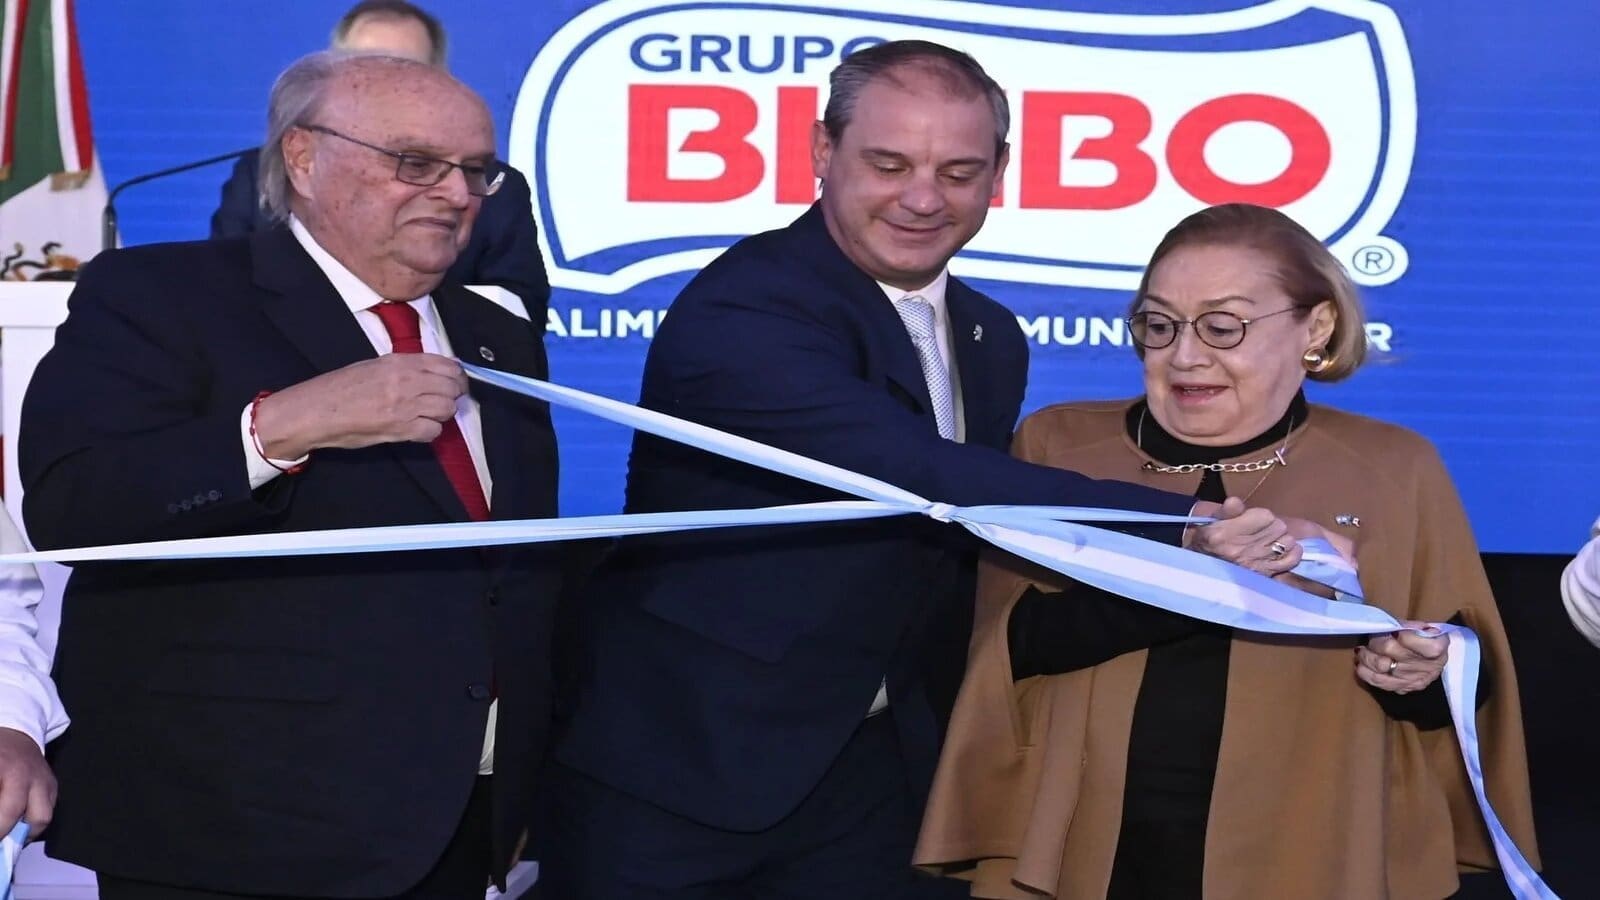 Grupo Bimbo inaugurates US$100m production line to bolster bread production in Argentina